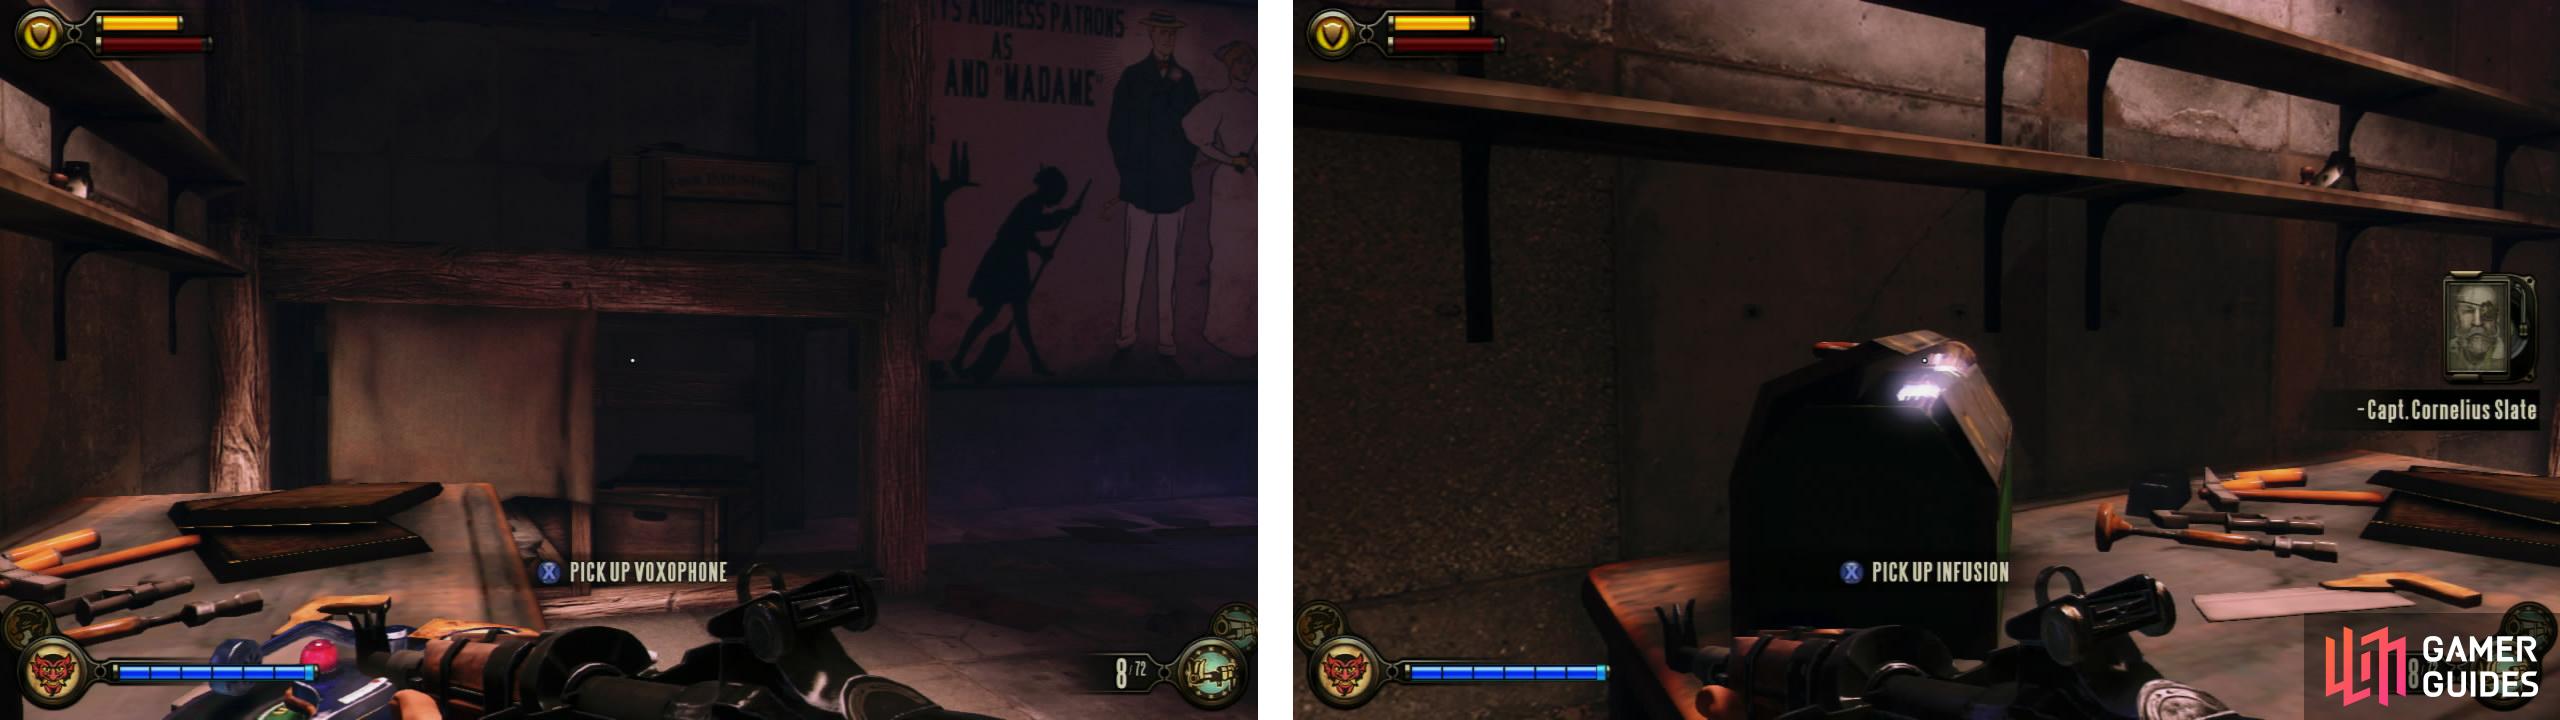 Go through the door on the left of the main room to find a Voxophone (left) and an Infusion Upgrade (right).